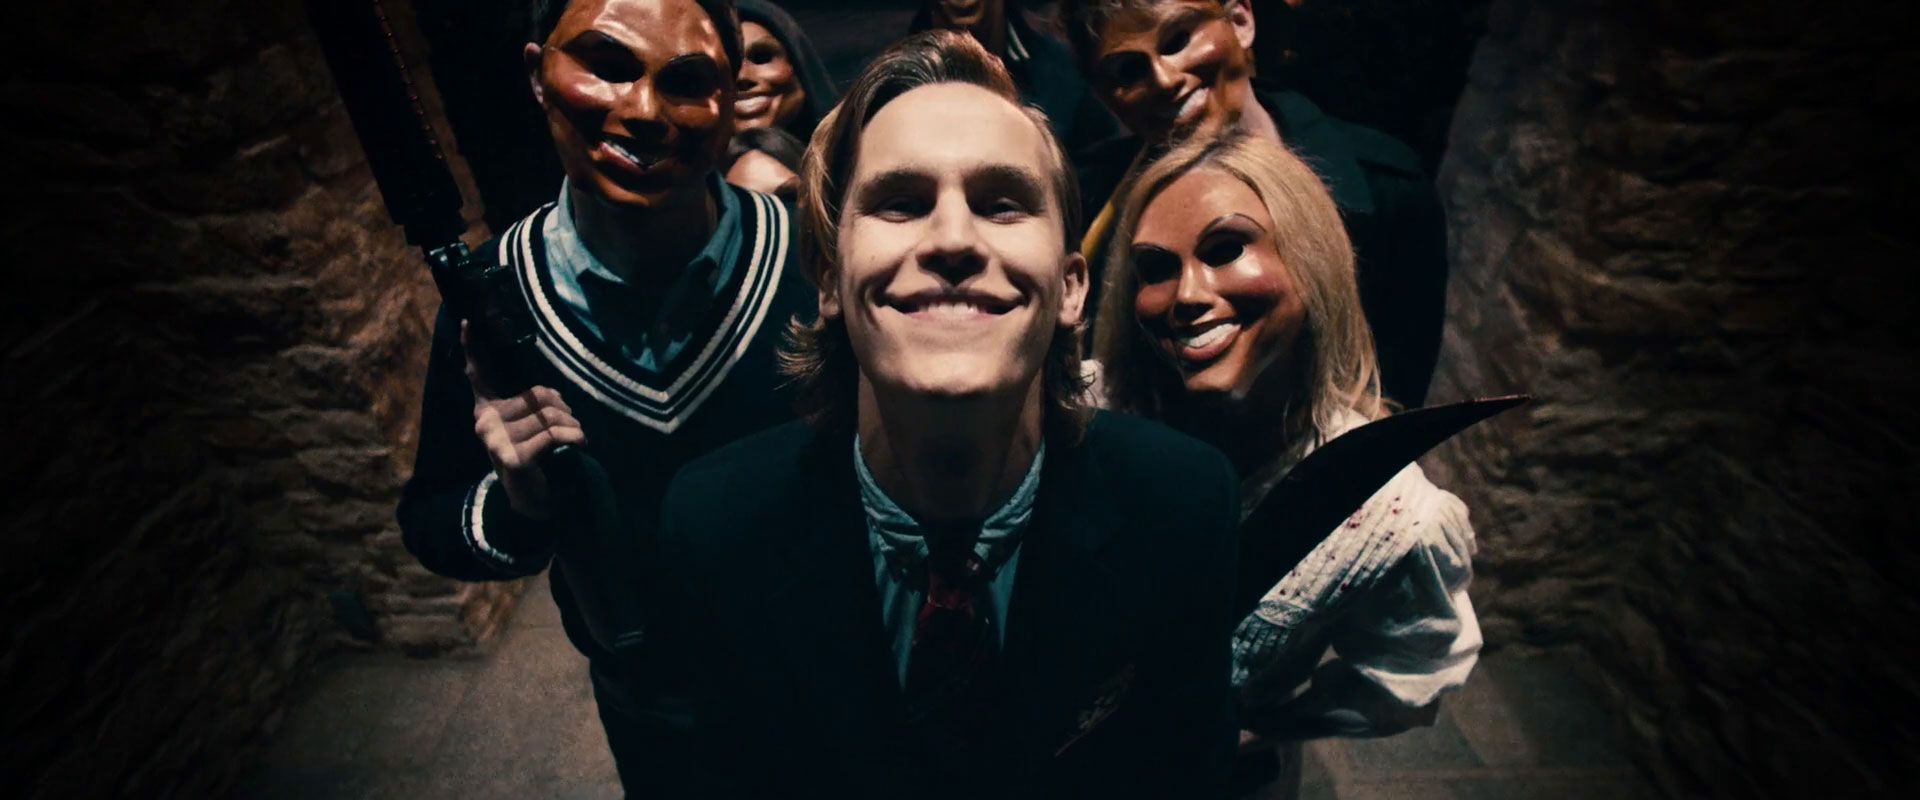 Watch the new trailer for ‘the purge: election year’